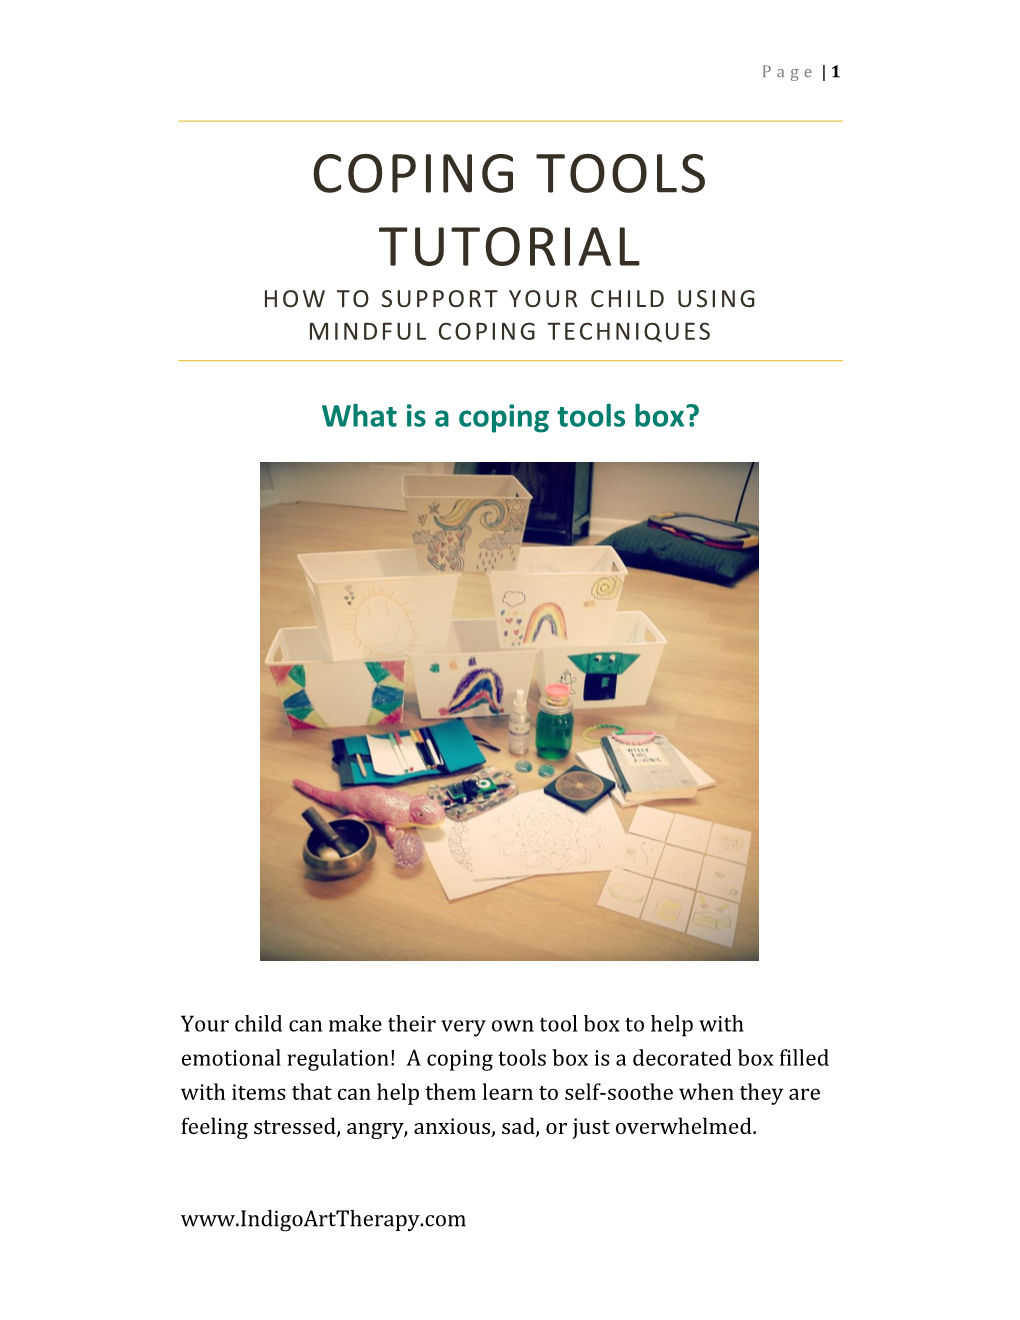 Coping Tools Tutorial How to Support Your Child Using Mindful Coping Techniques